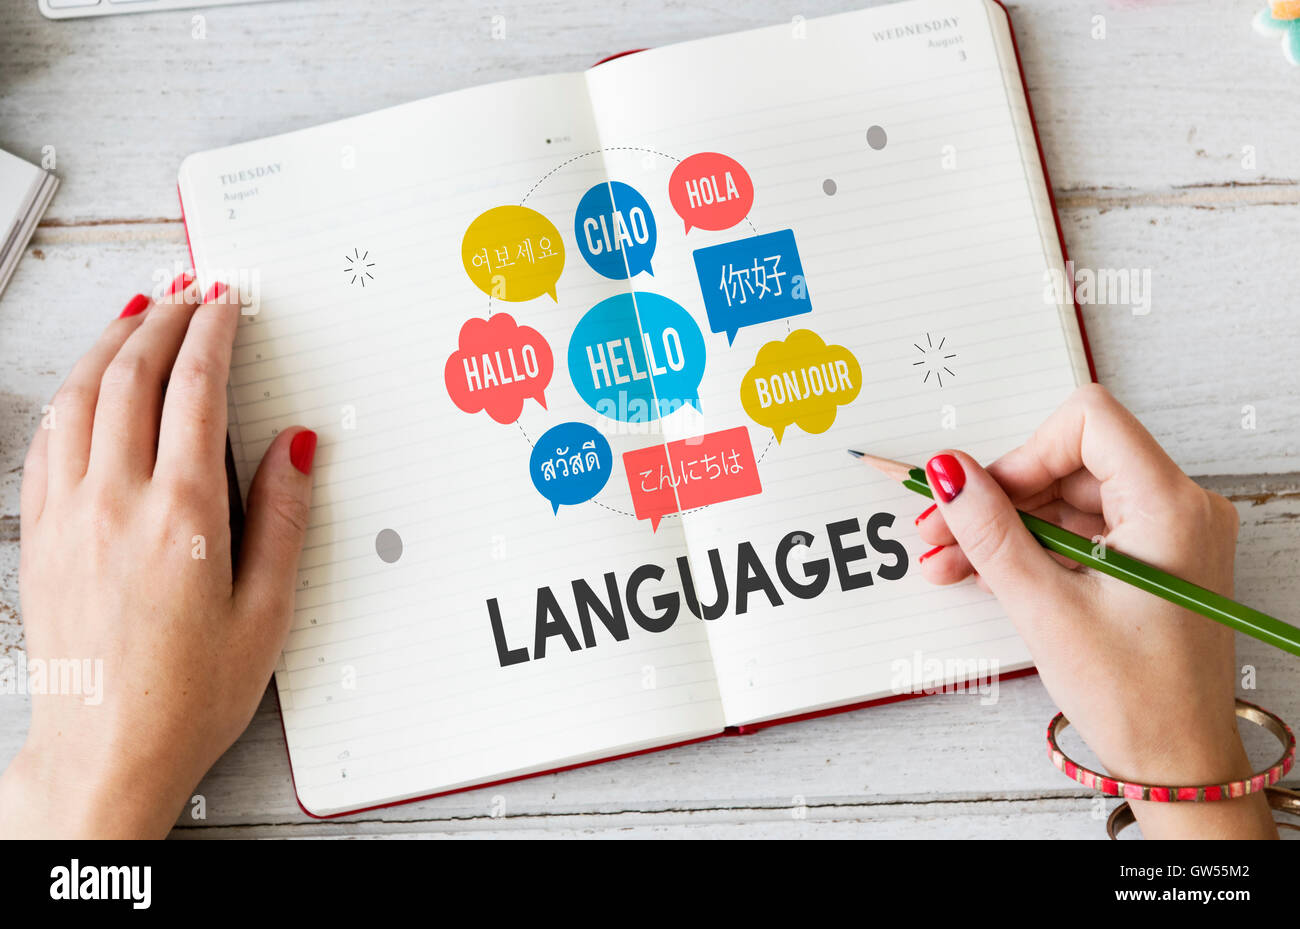 Multilingual Greetings Languages Concept Stock Photo